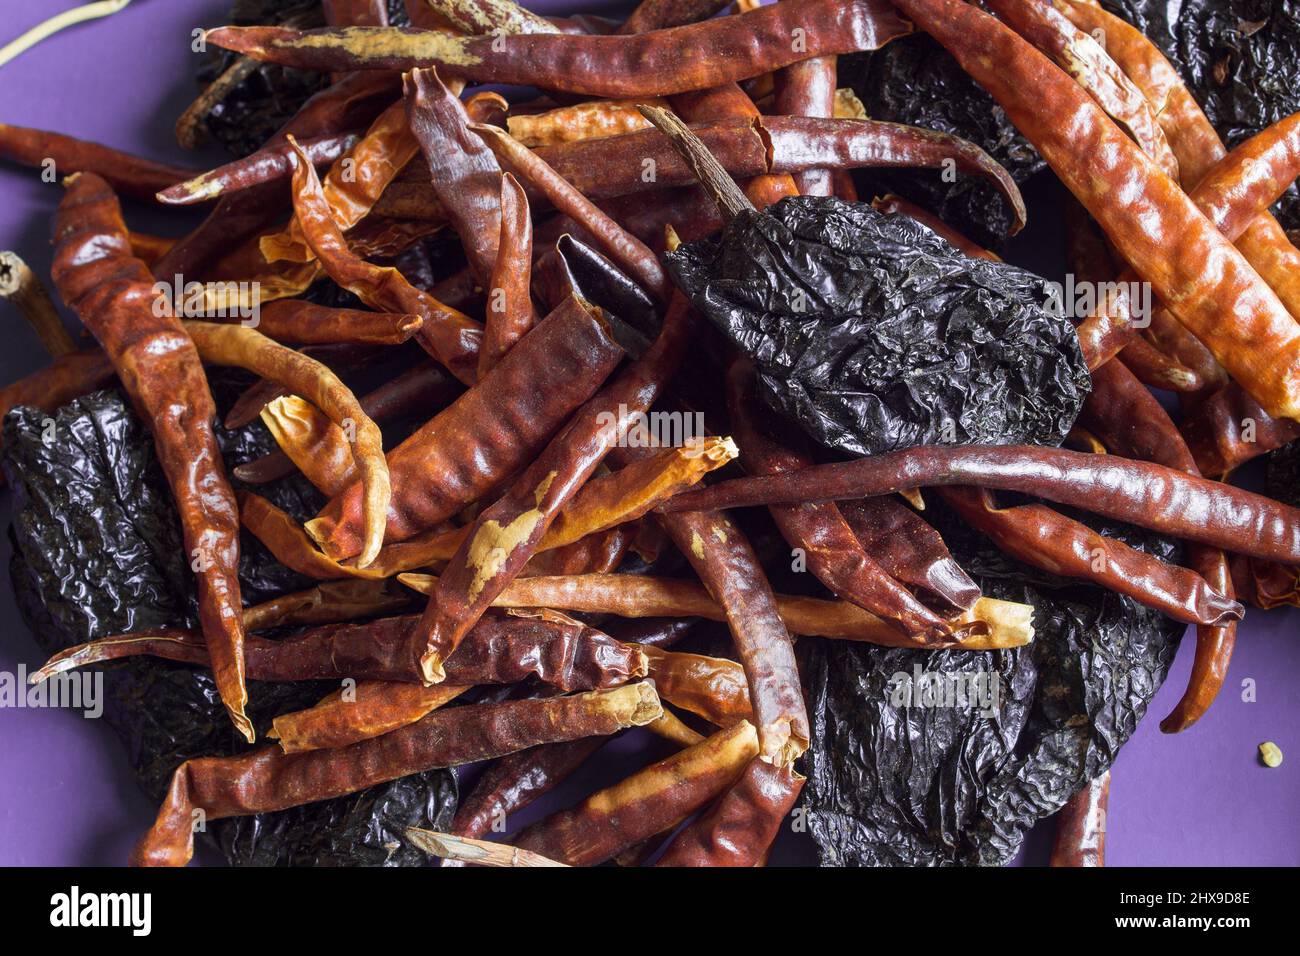 Different kinds of sun-dried hot peppers stacked haphazardly on a purple-colored background. Food and vegetables. Stock Photo